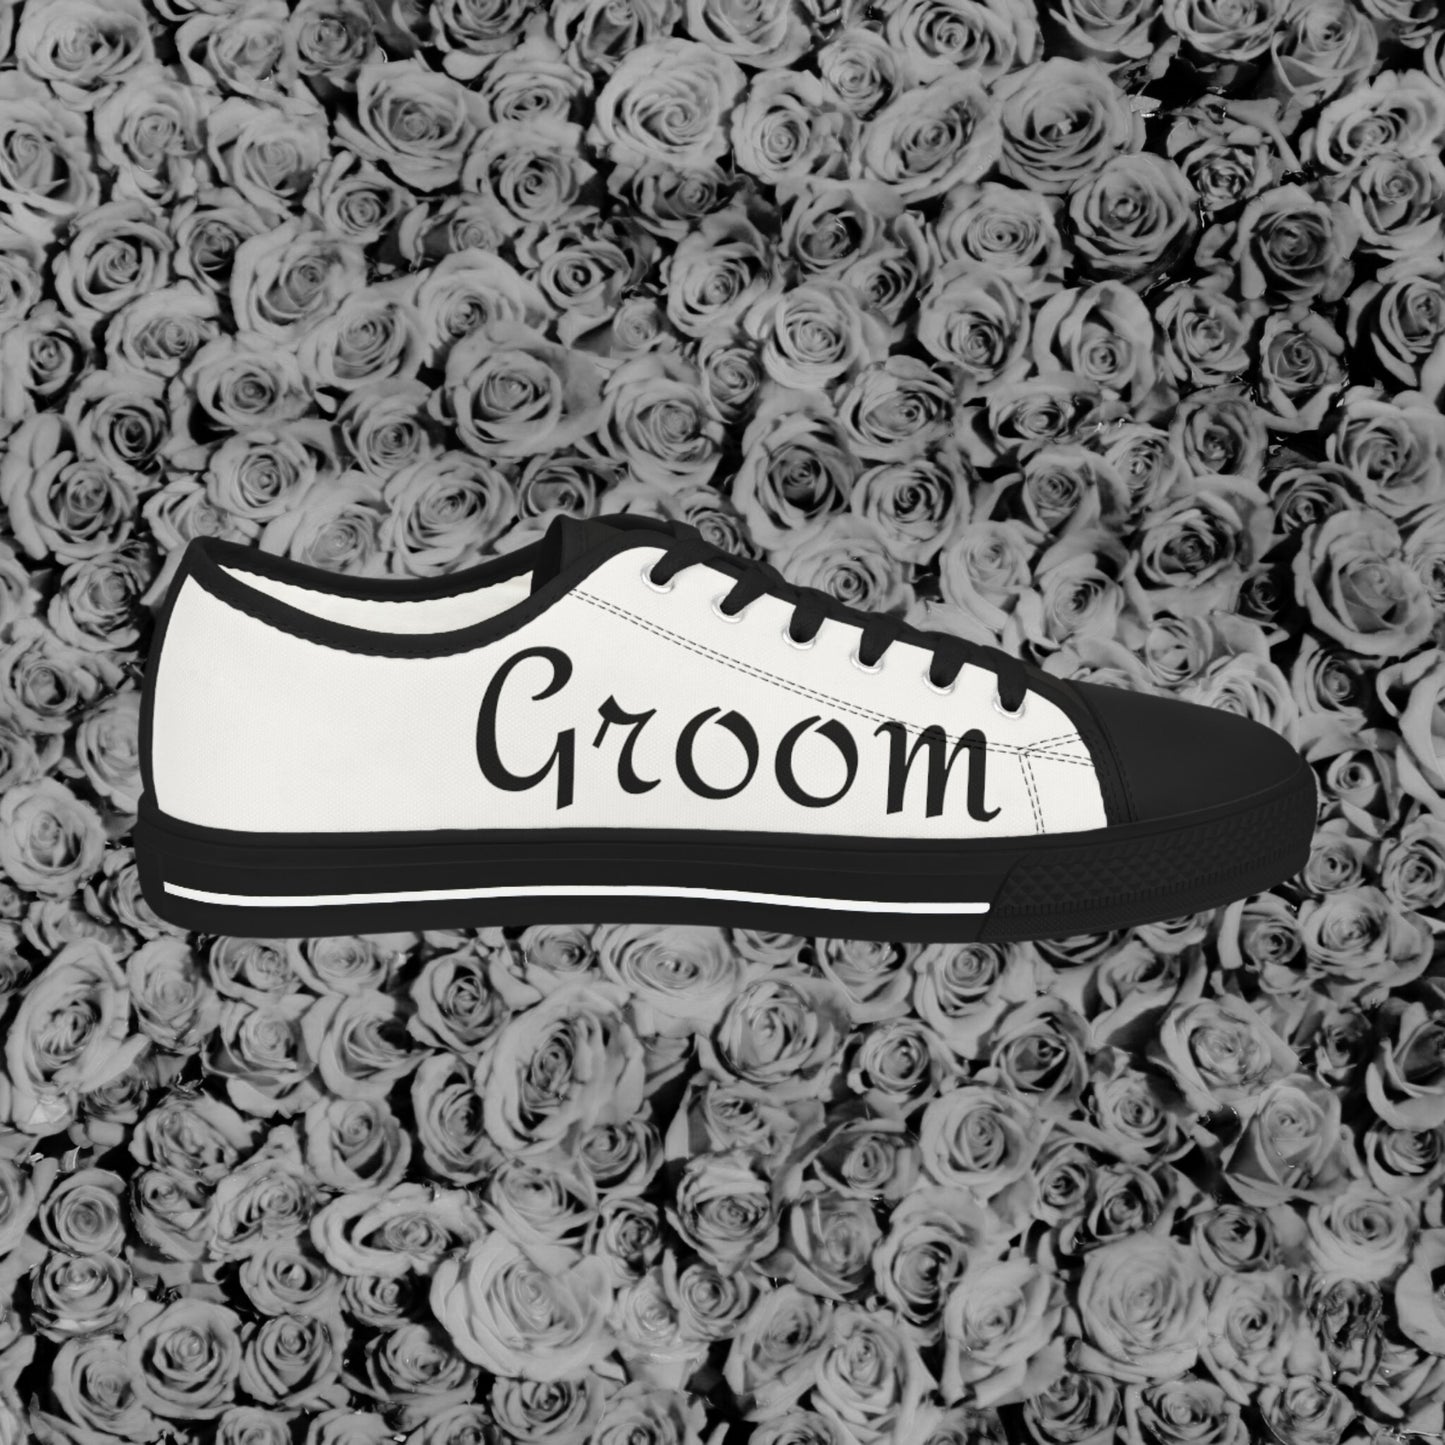 Gothic Groom Sneakers Shoes Brides by Emilia Milan 